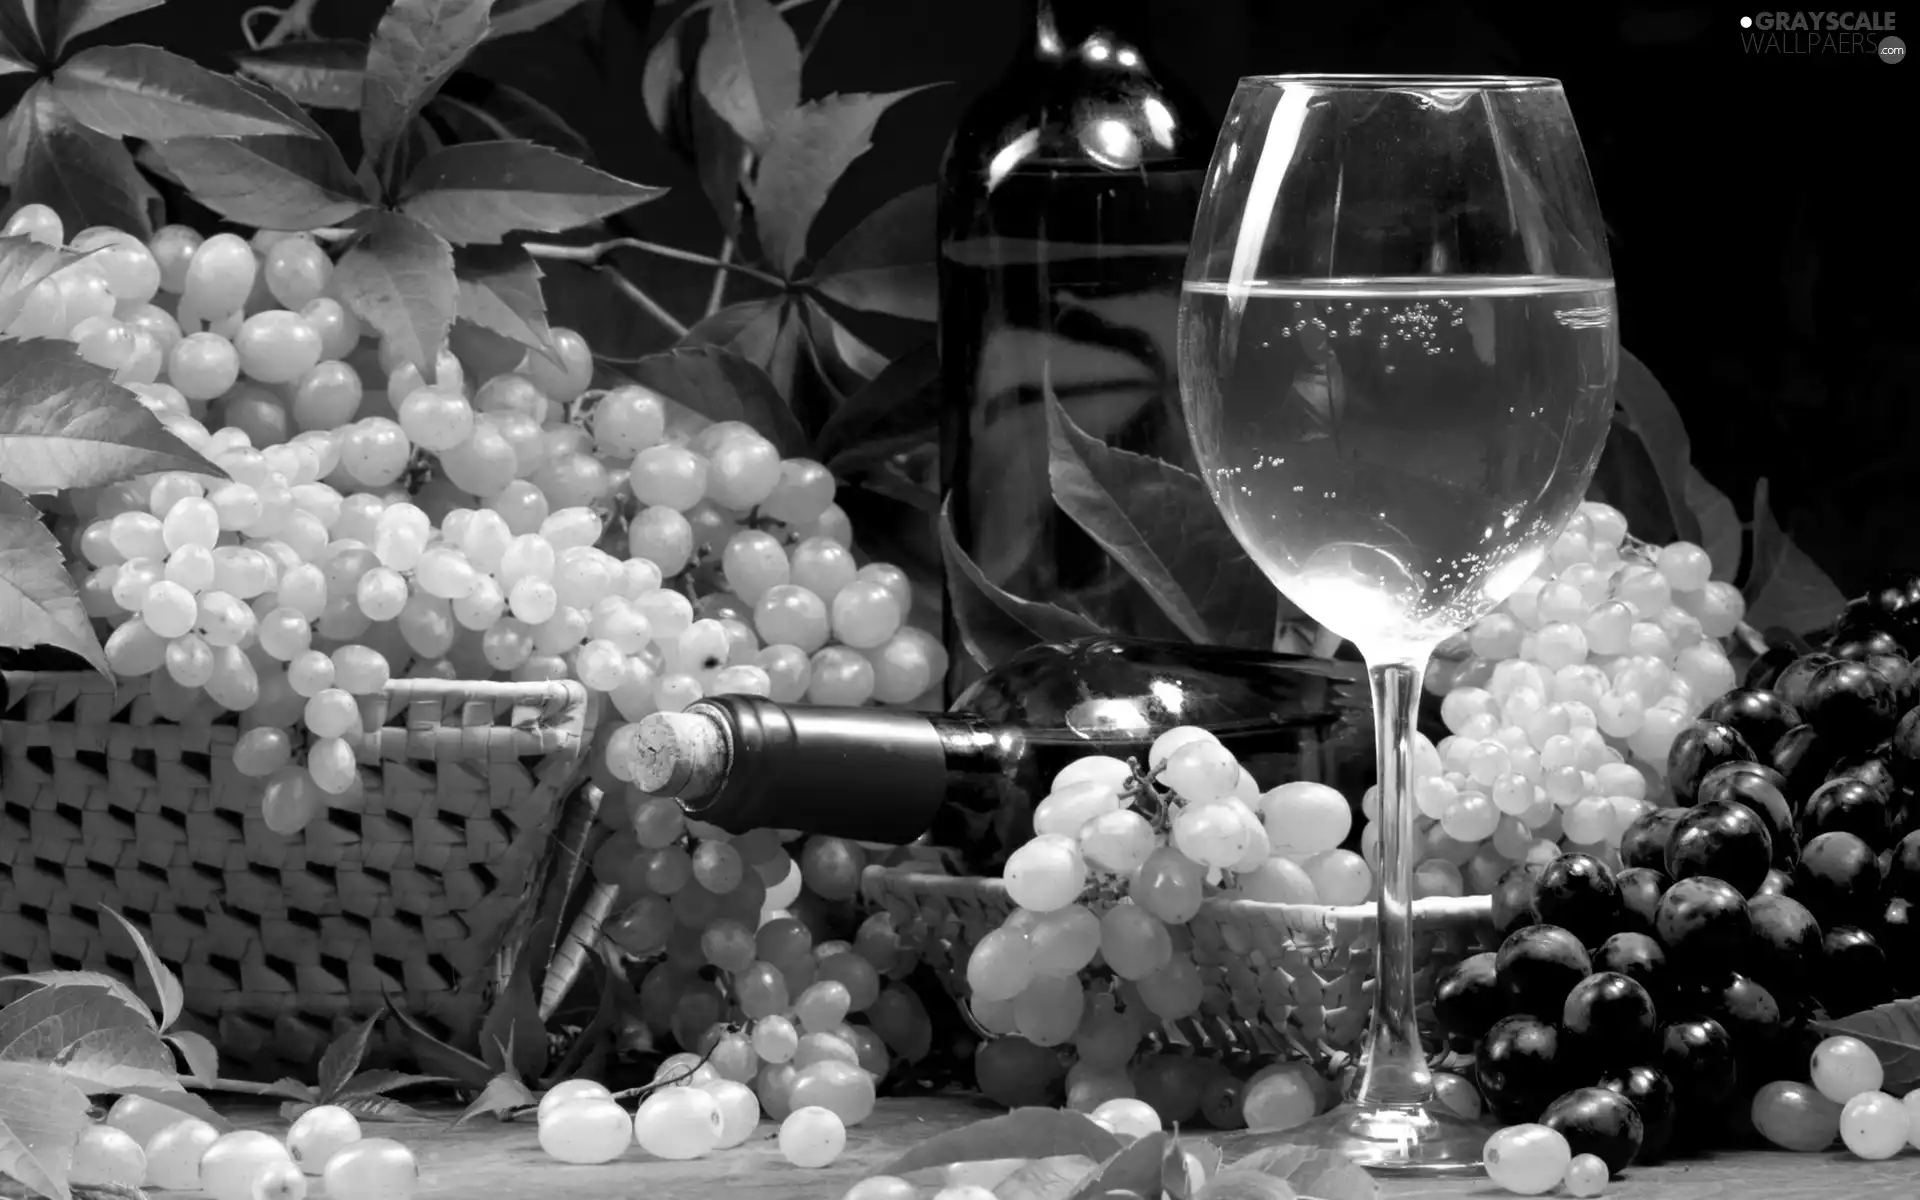 Bottle, Wine, grapes, glass, bunches